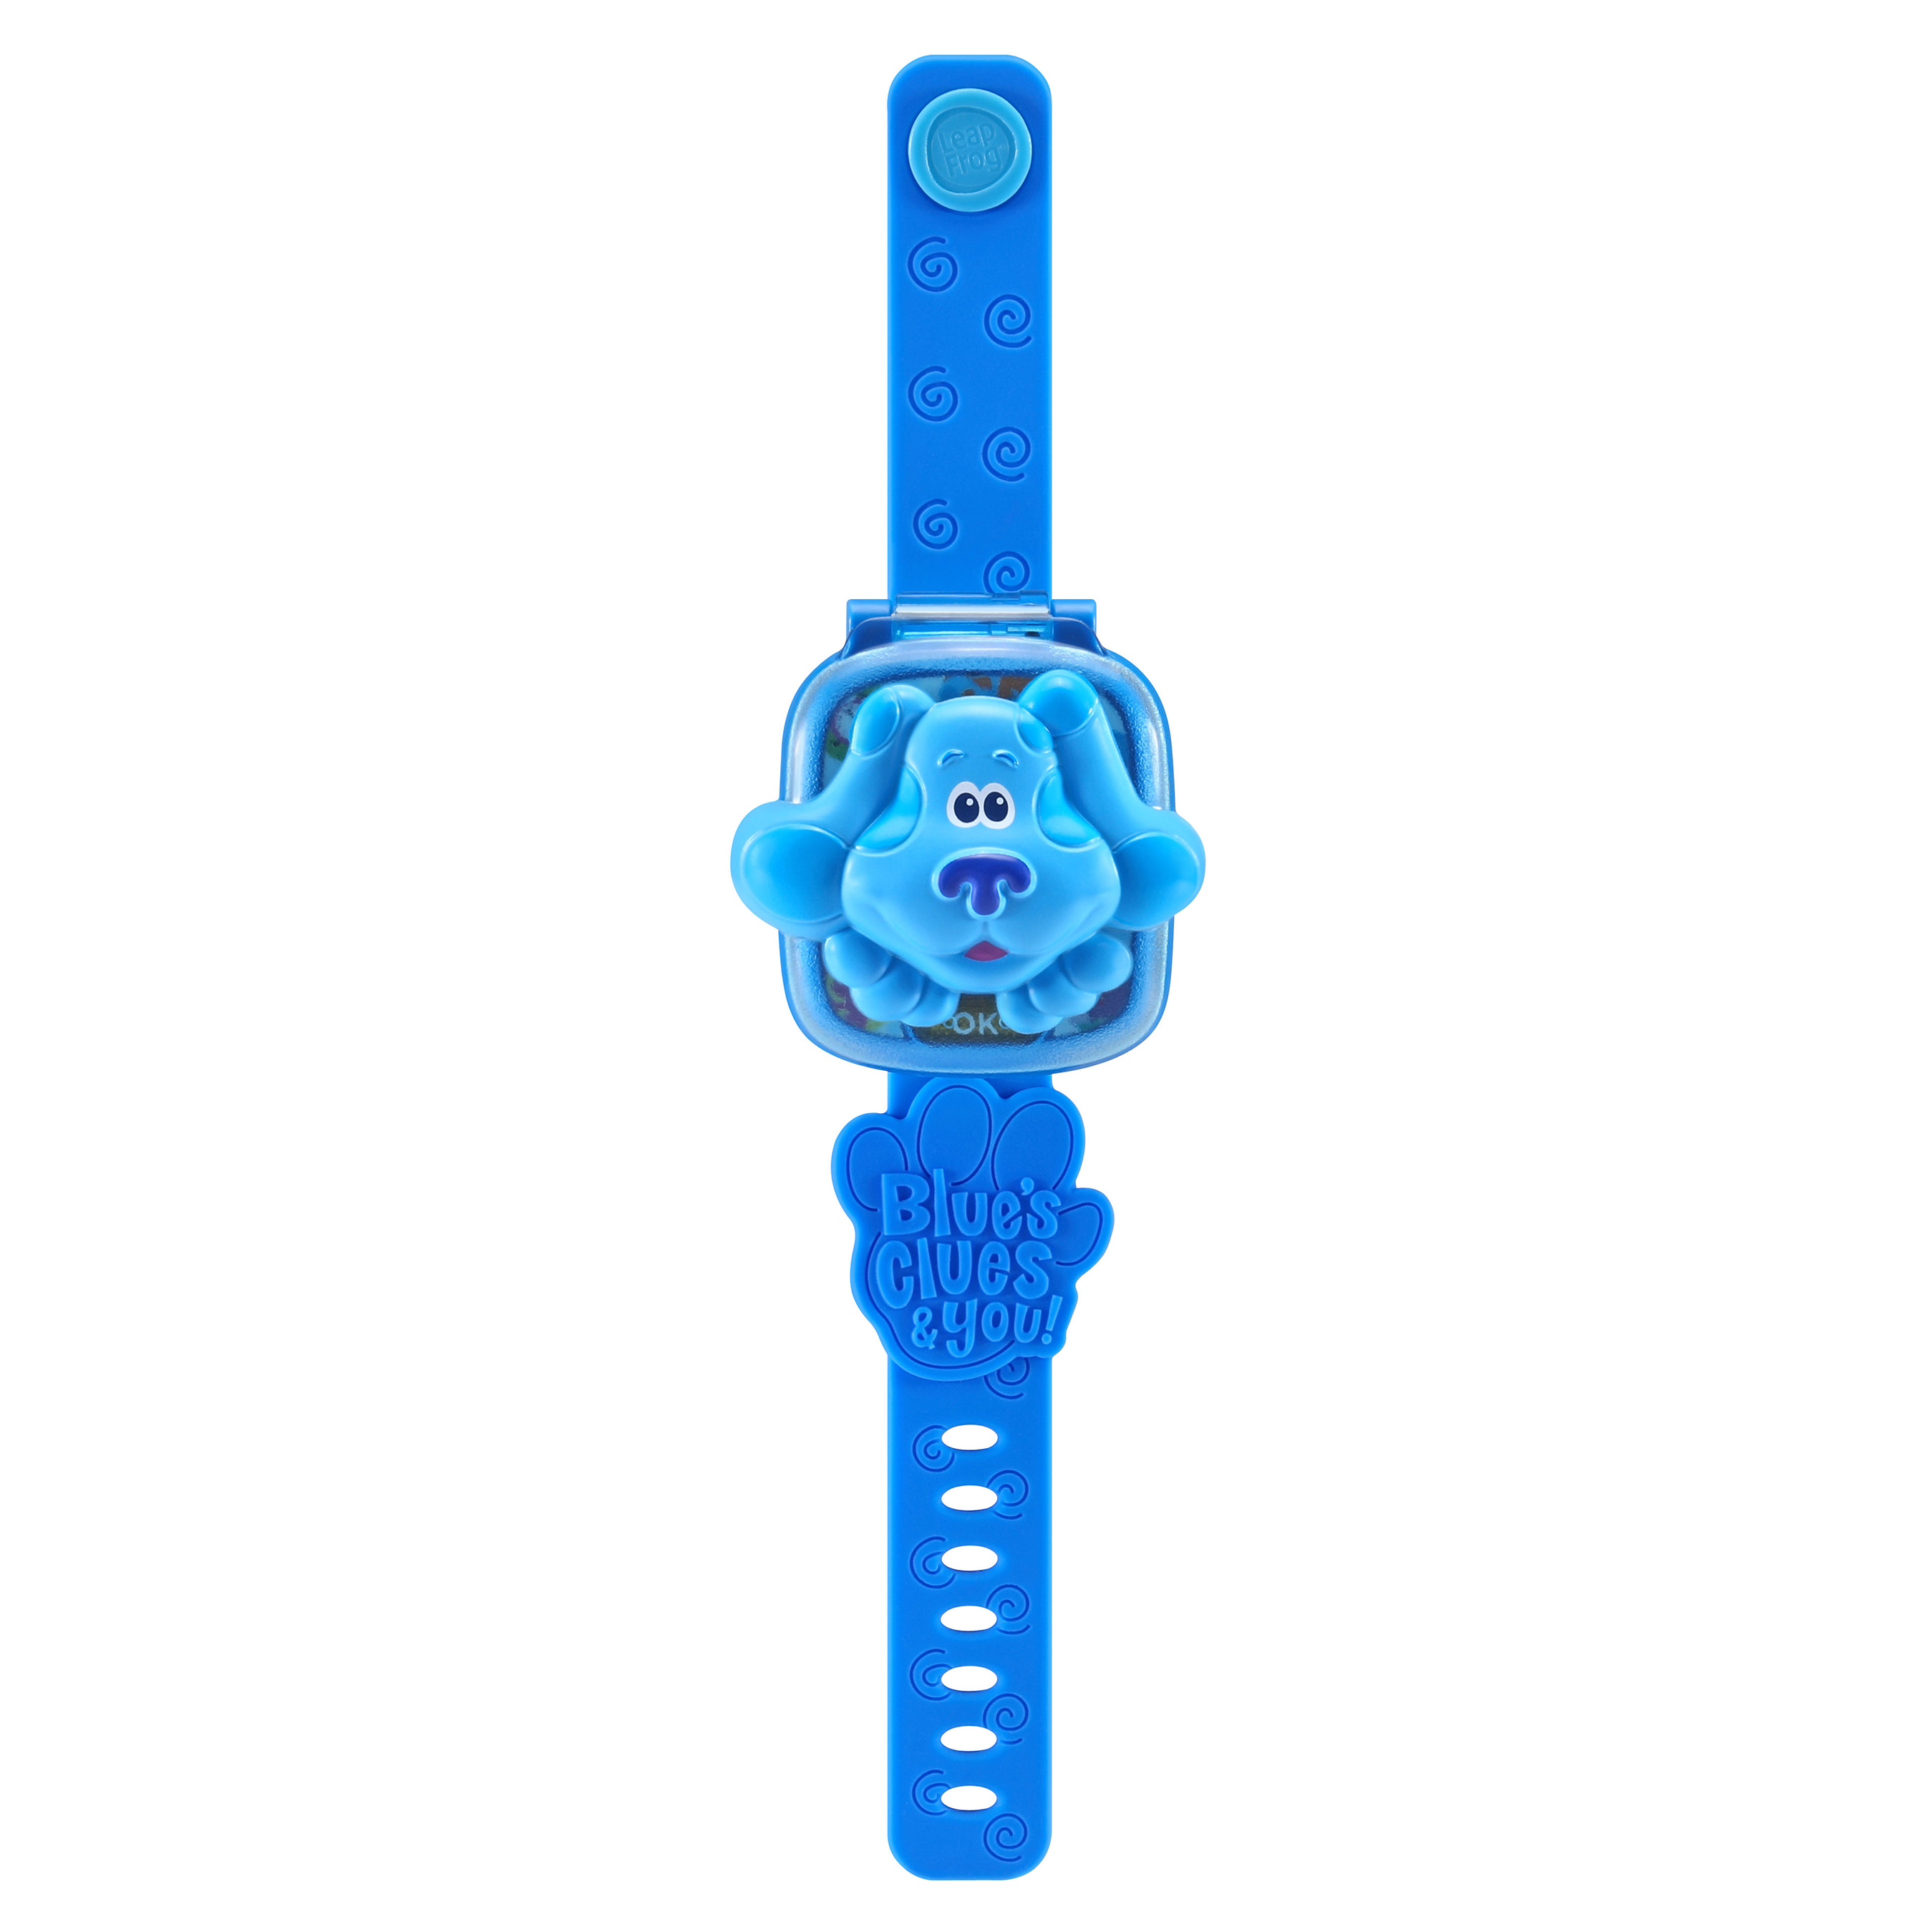 New Blue's Clues & You! Blue Learning Watch from LeapFrog is available now.